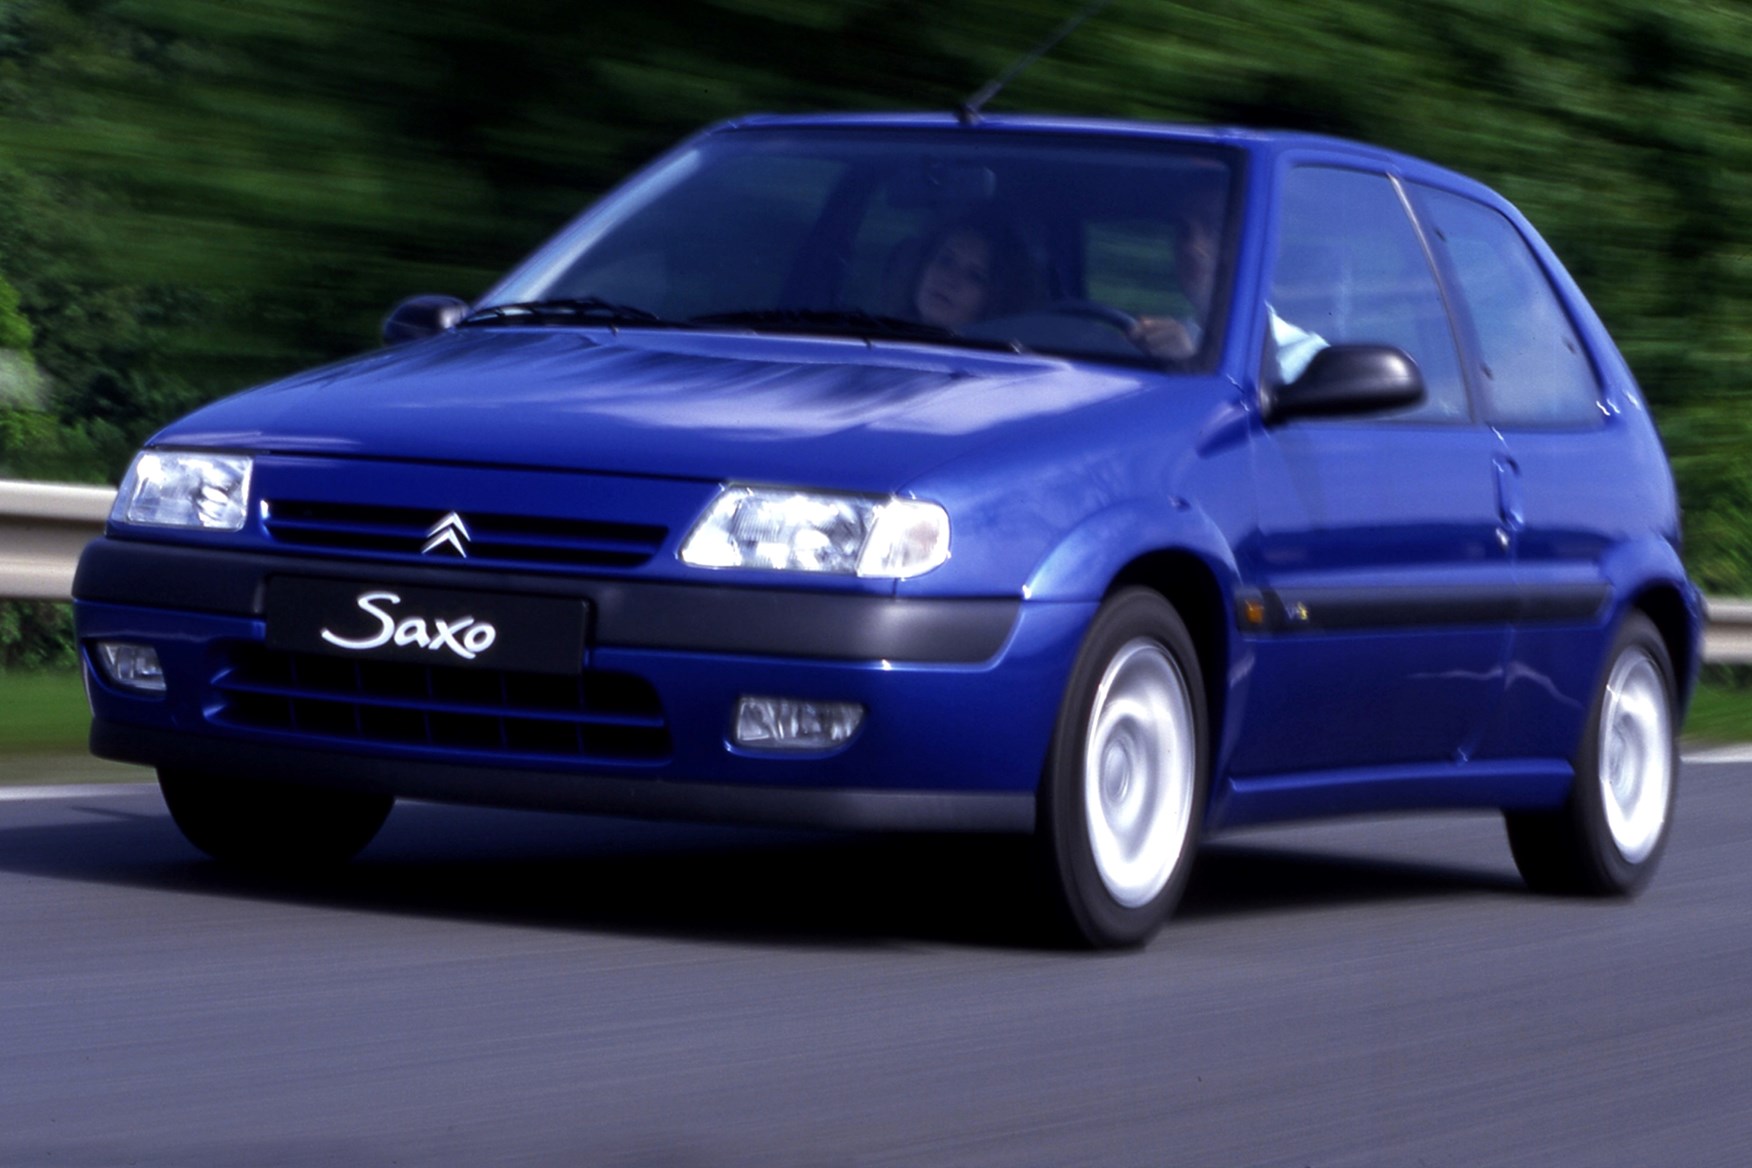 Citroen Saxo 1996 03 Review And Buying Guide